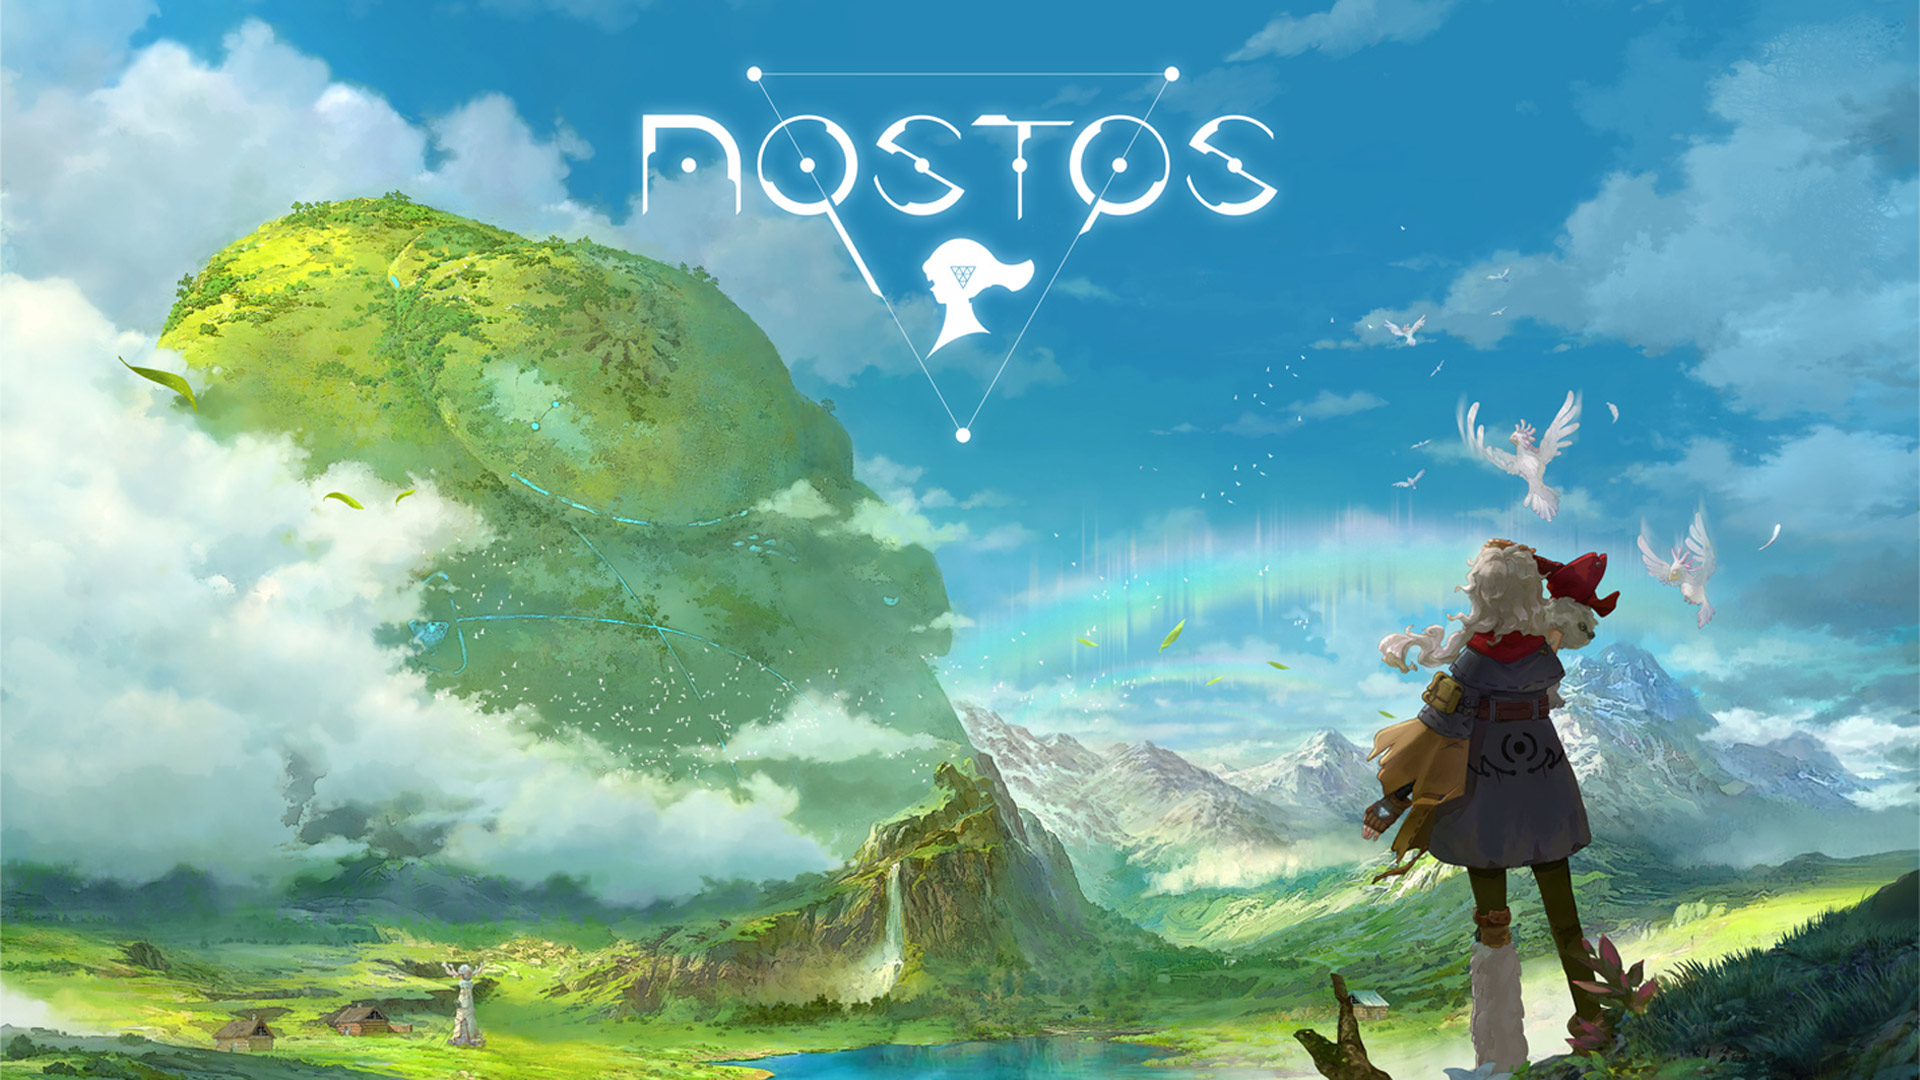 Hands-on: 'Nostos' Aims to Deliver Anime-inspired Open World RPG in VR